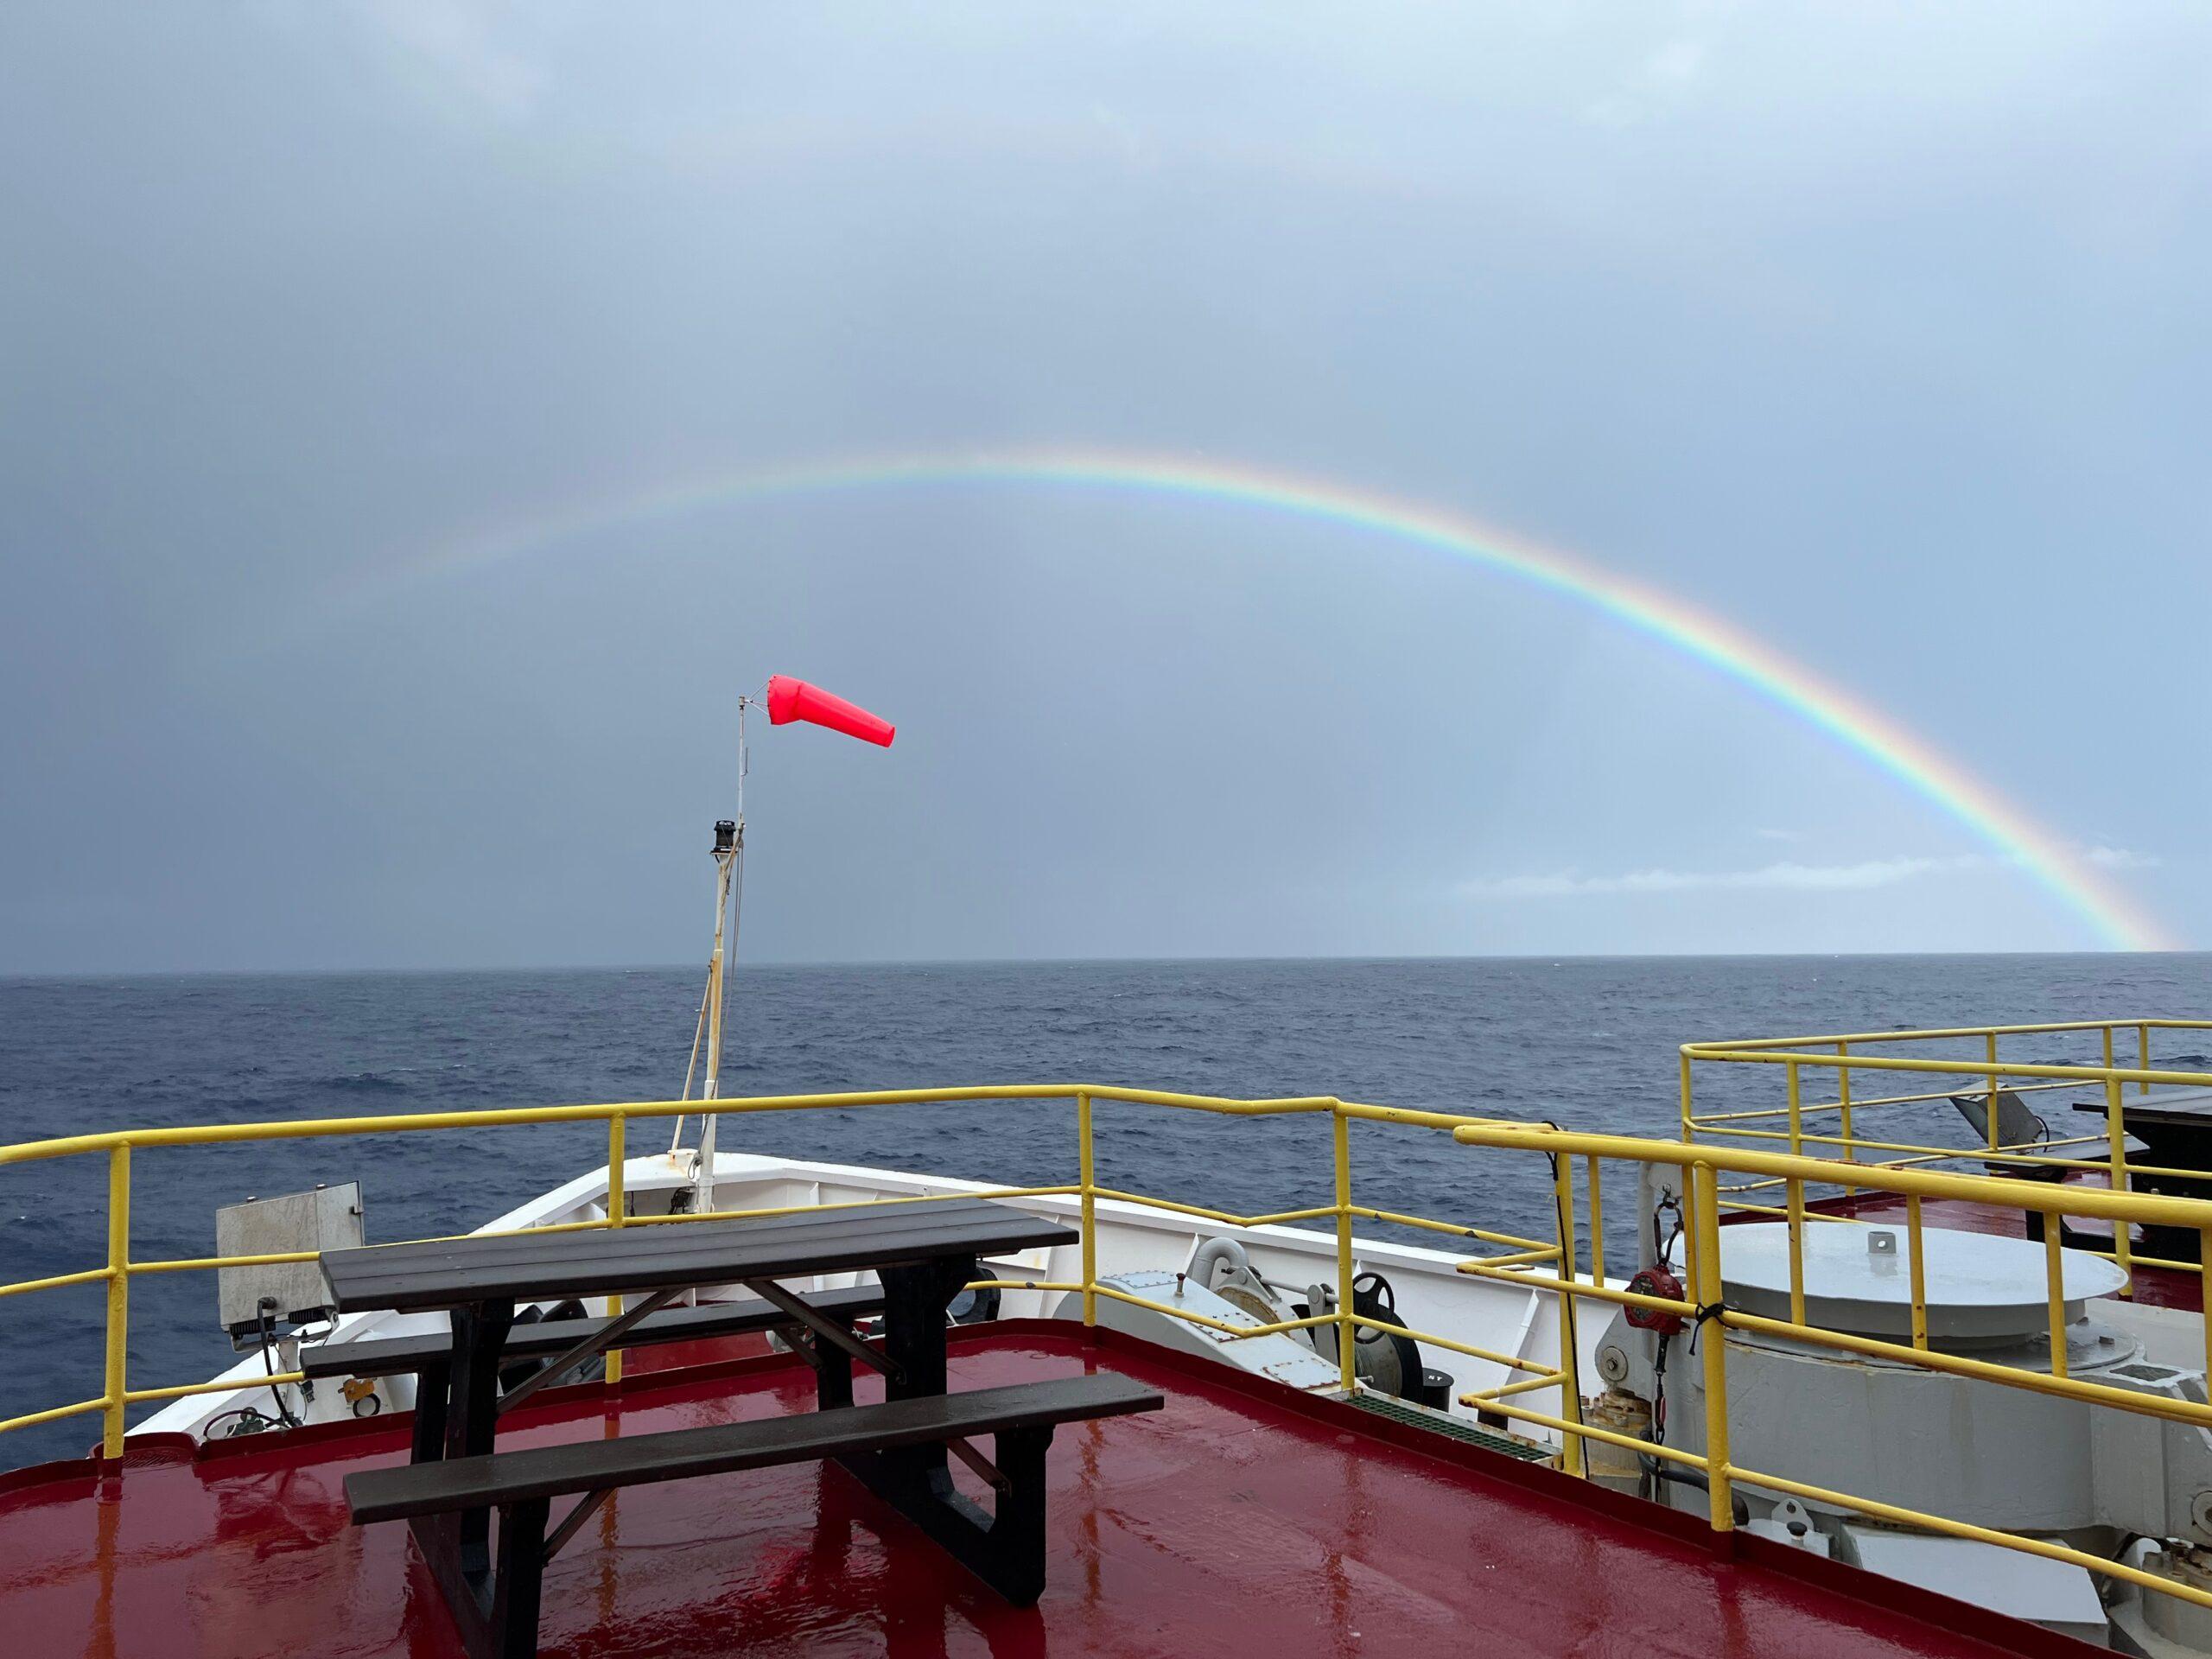 rainbow past bow of ship on water